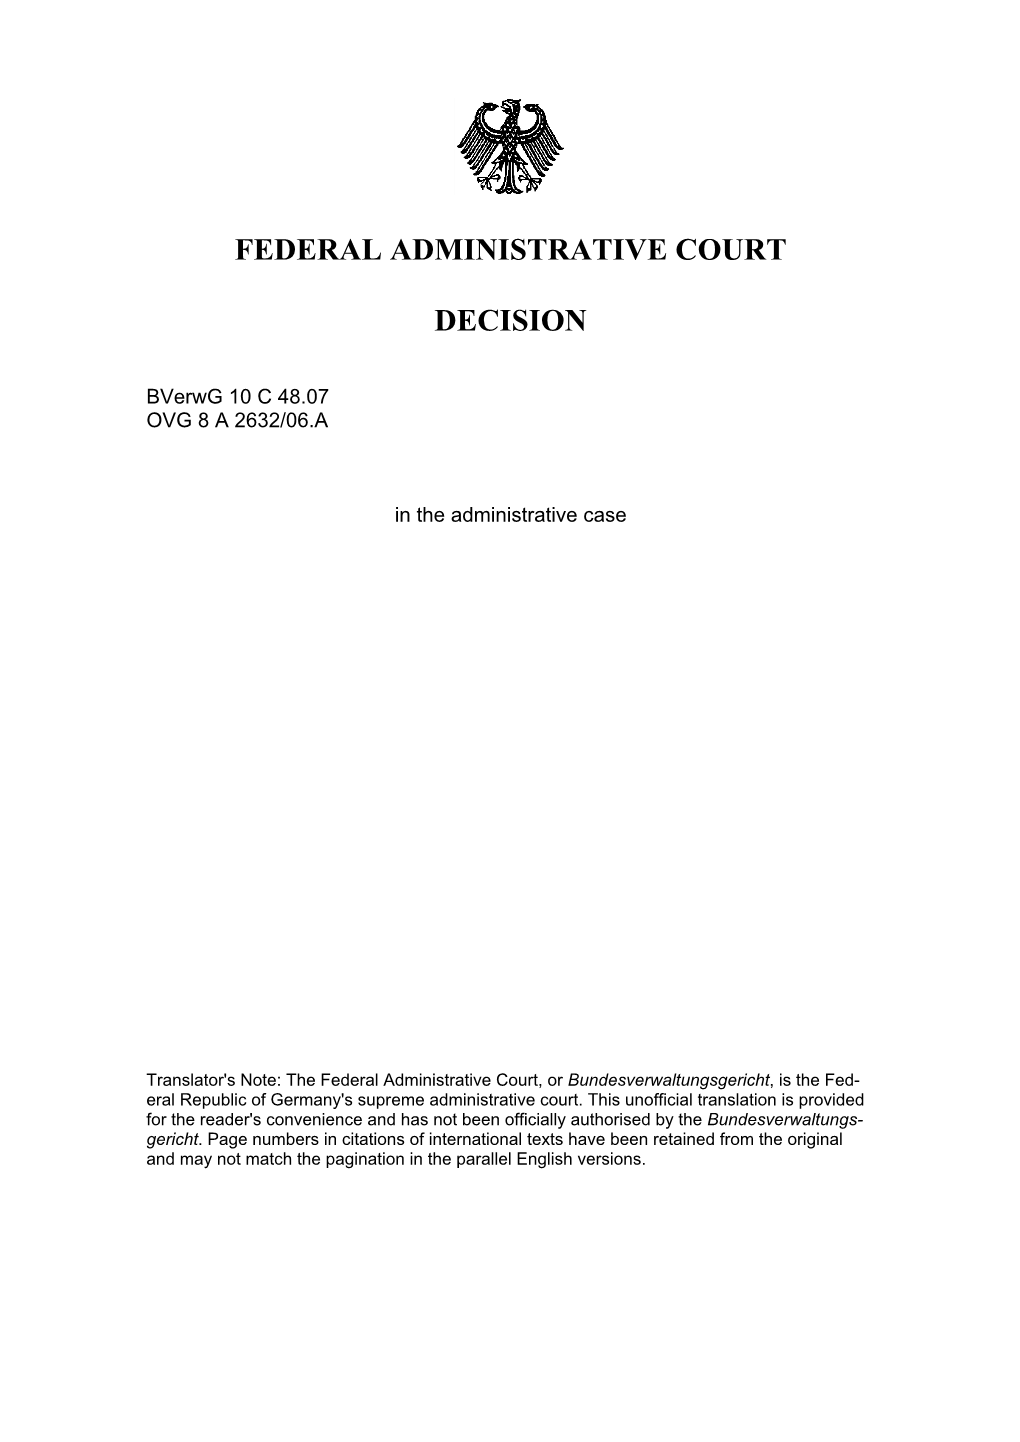 Federal Administrative Court Decision